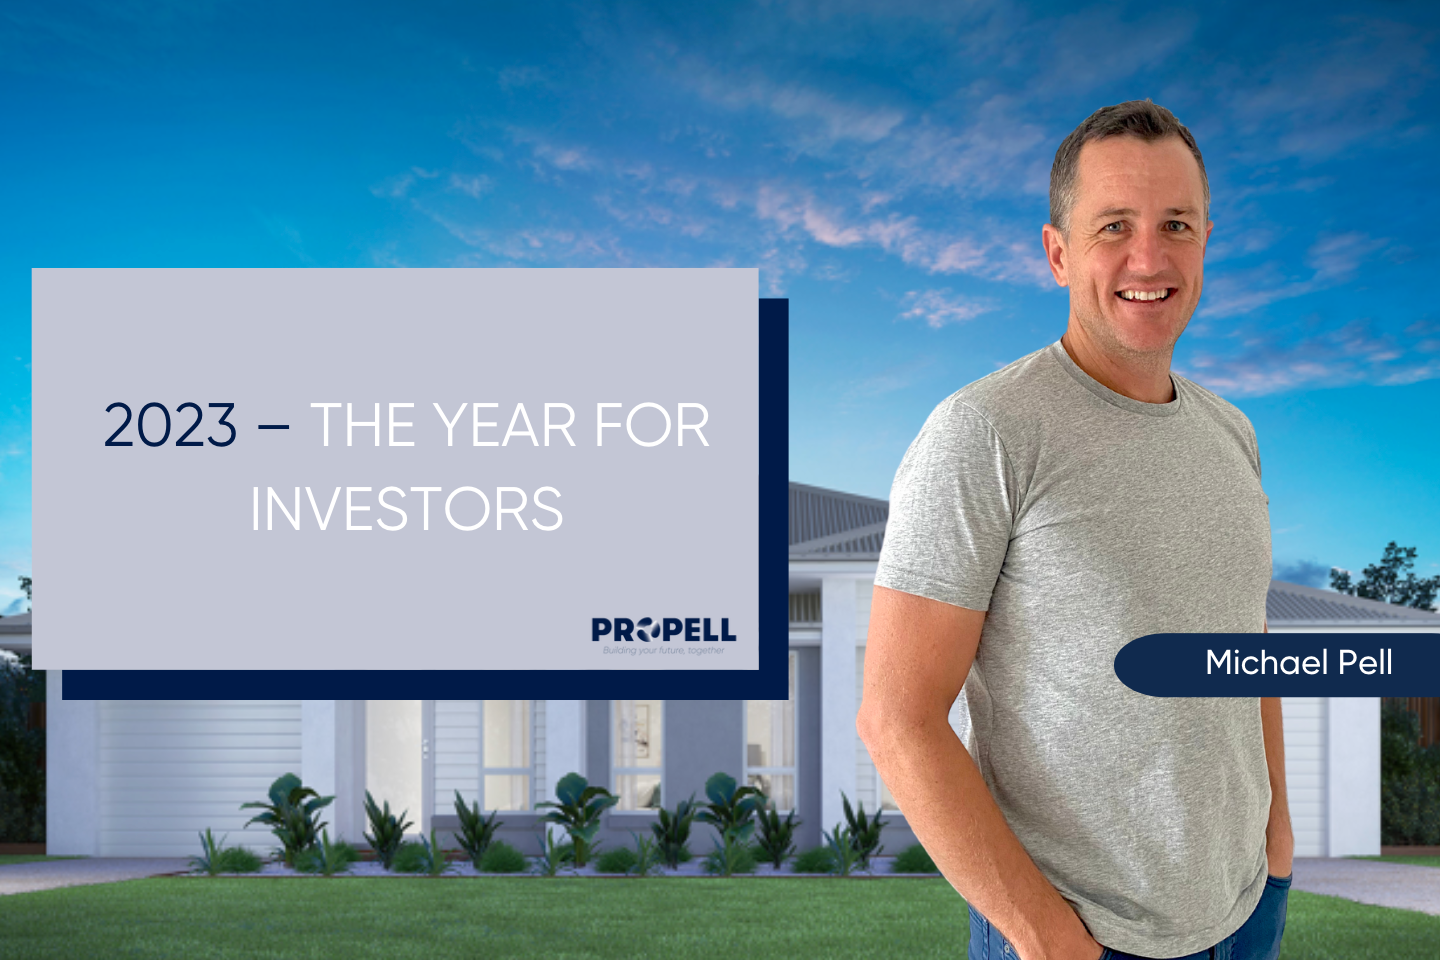 2023 – THE YEAR FOR INVESTORS